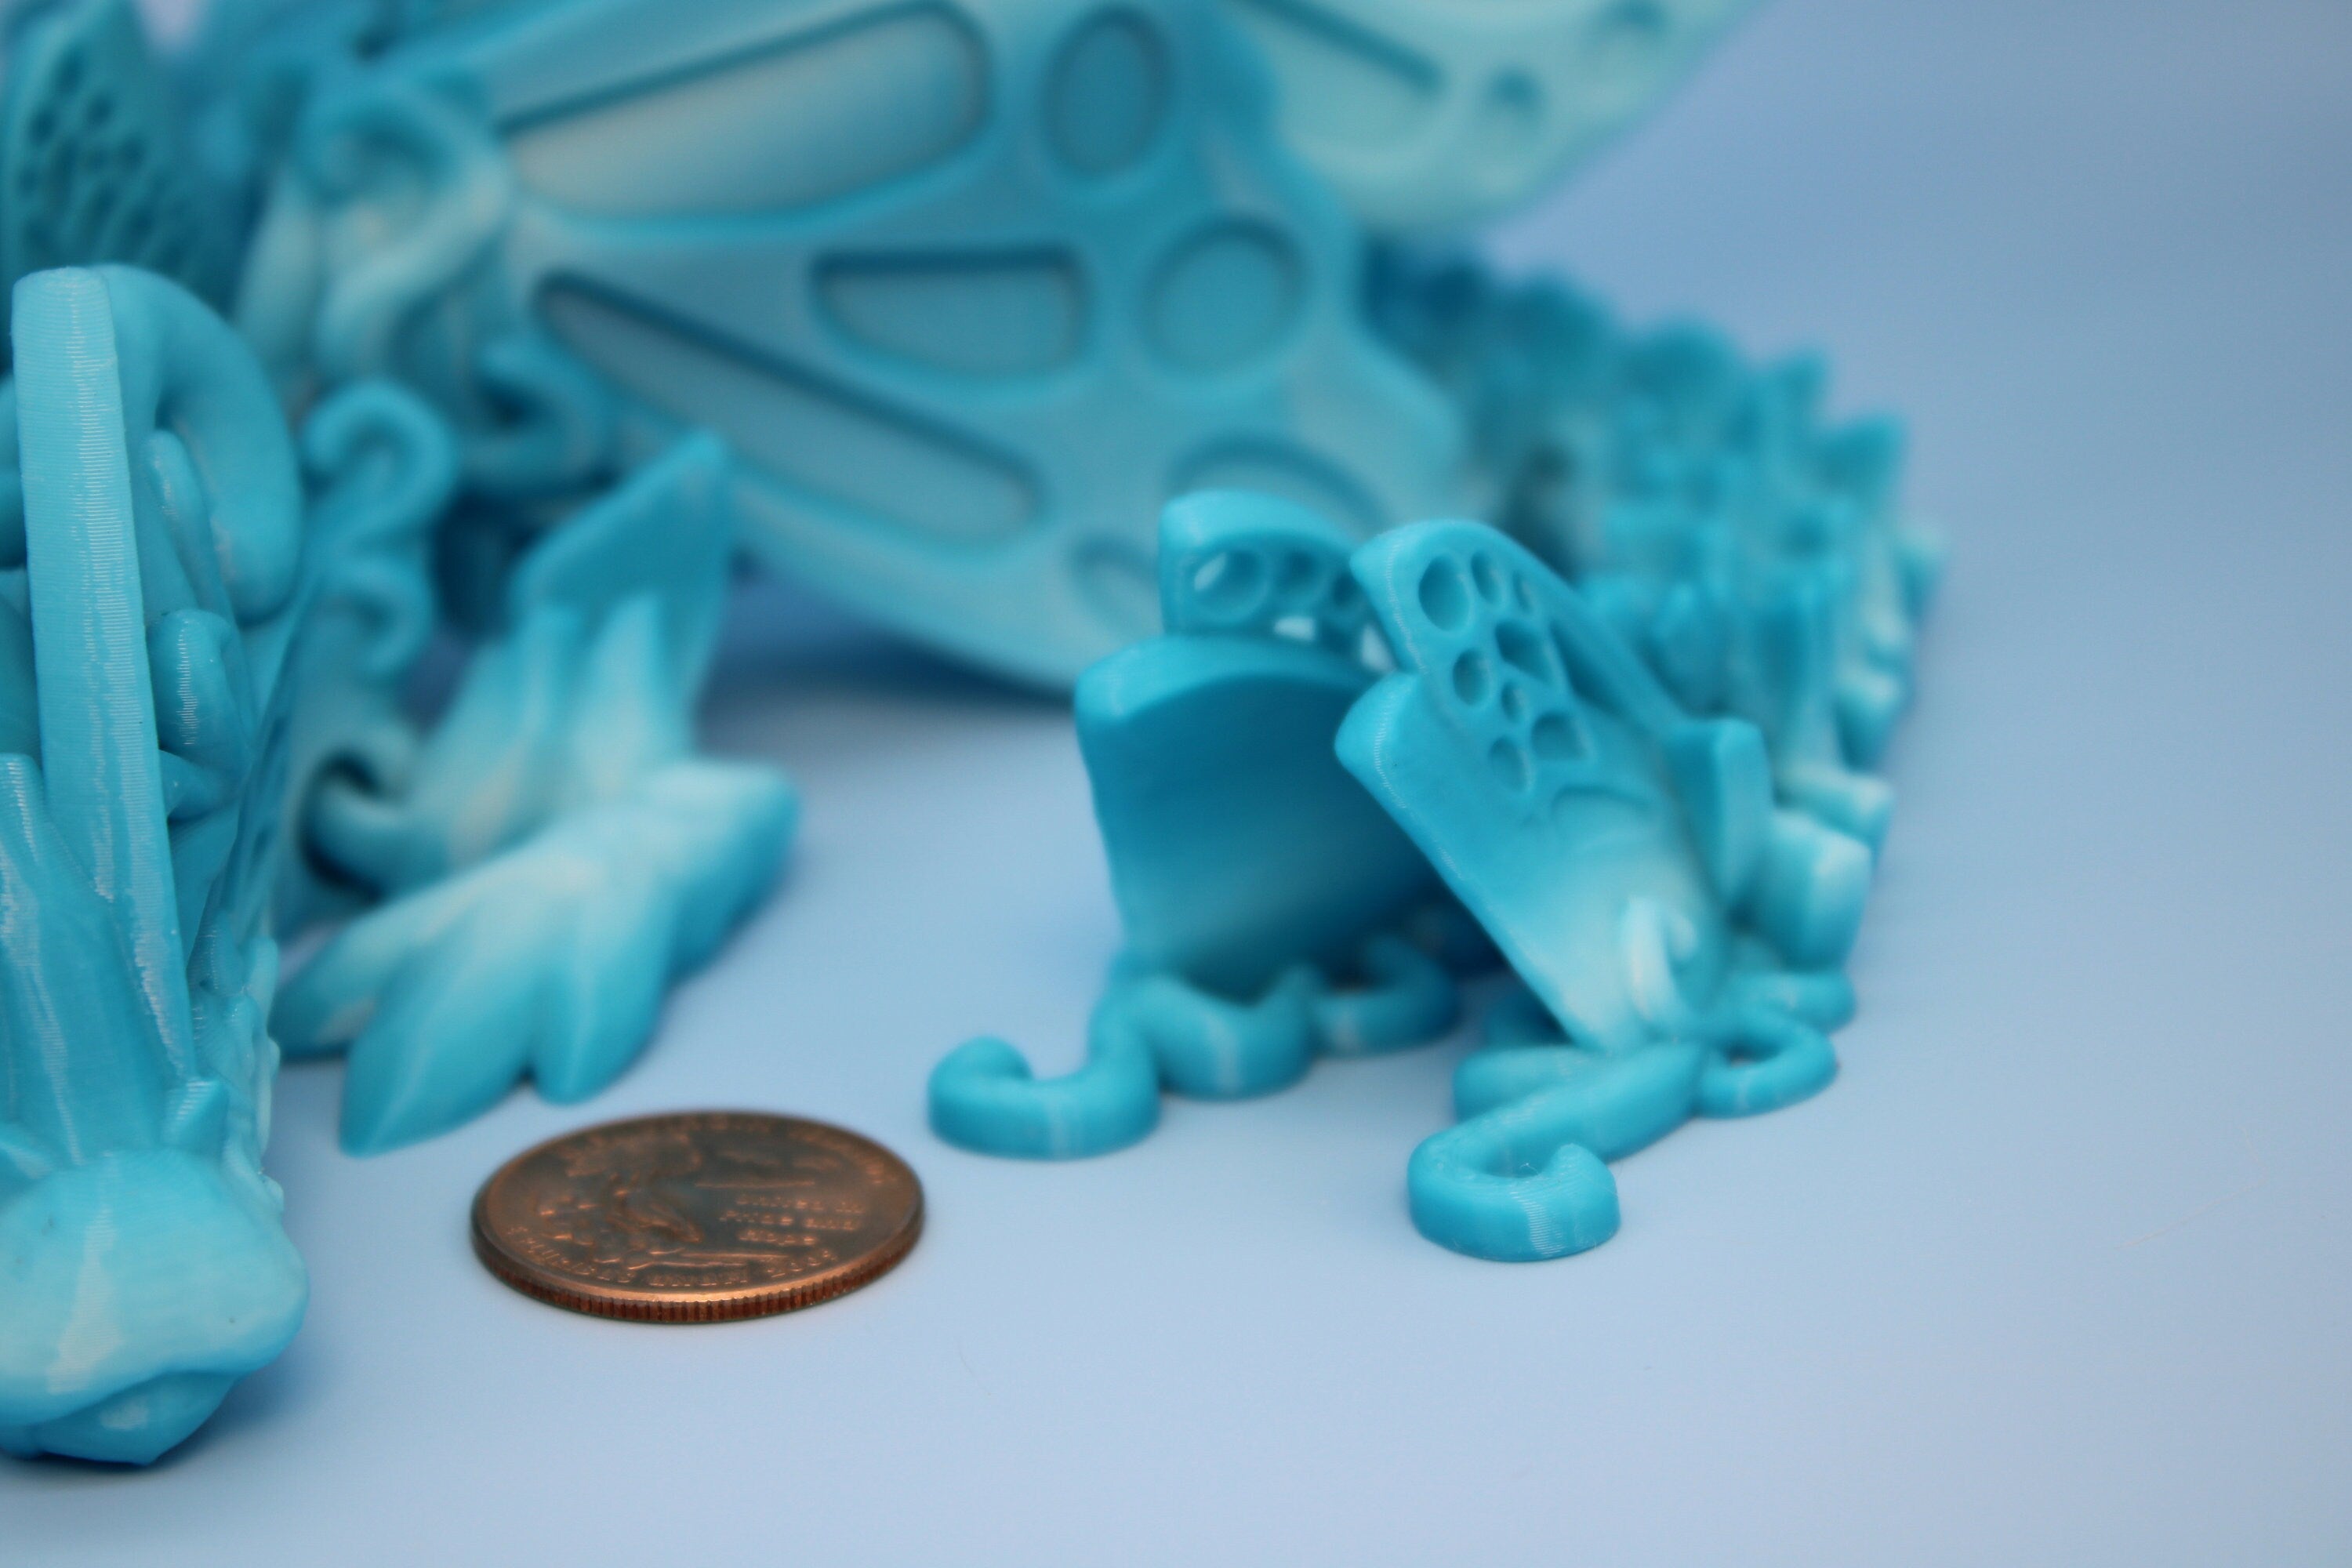 Butterfly Wing Dragon- Blue | 3D Printed Articulating Dragon 18 in.